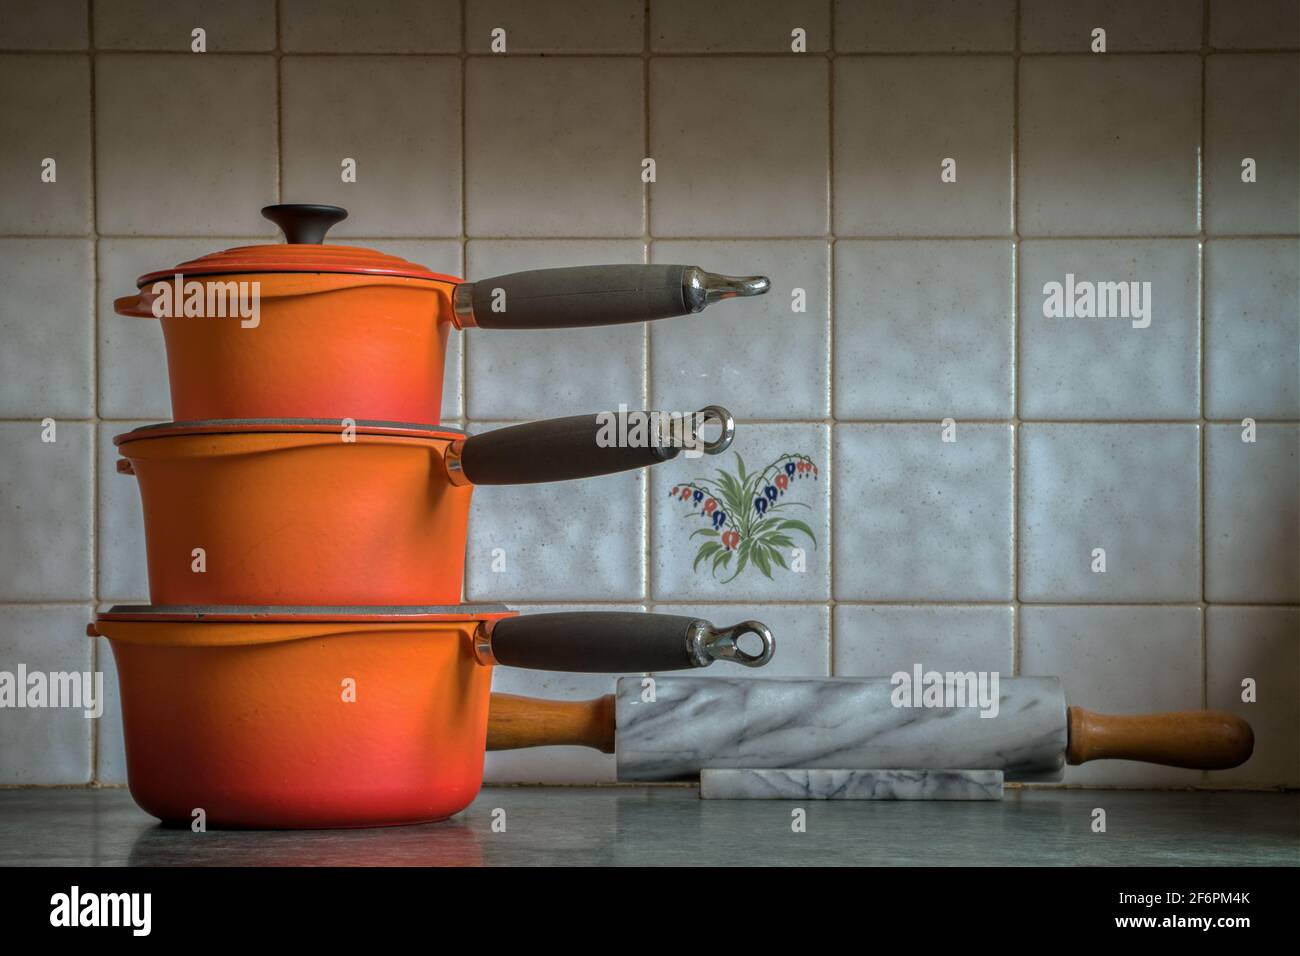 Three orange cast iron saucepans stacked up on a kitchen counter; marble rolling pin; decorated tiles in the background. Stock Photo